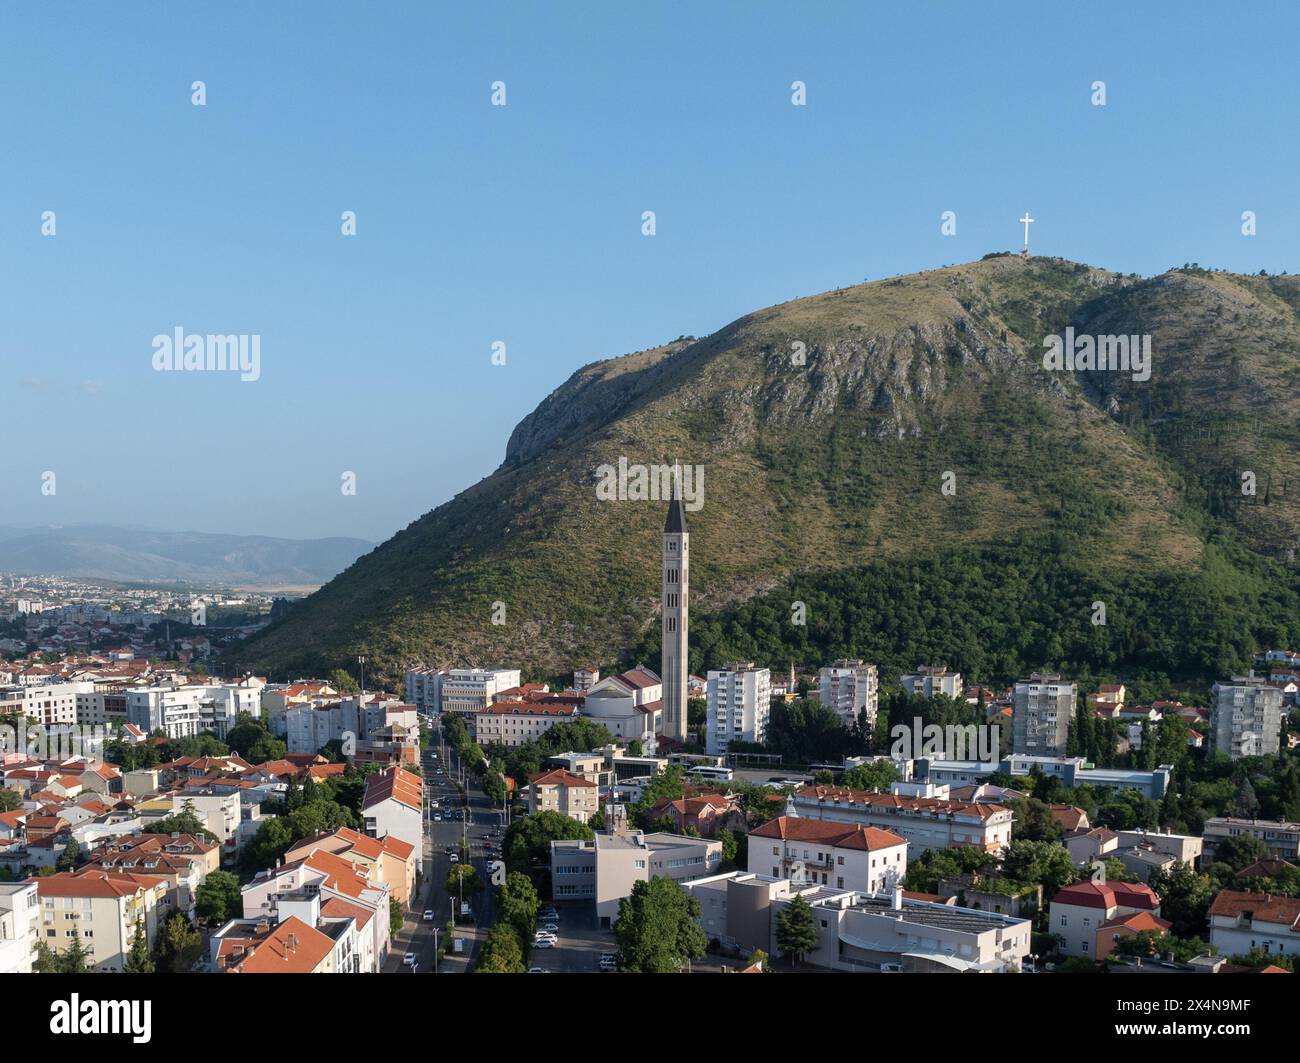 Franciscan monastery and church of St. Peter and Paul in the city of Mostar, Bosnia and Herzegovina. Stock Photo